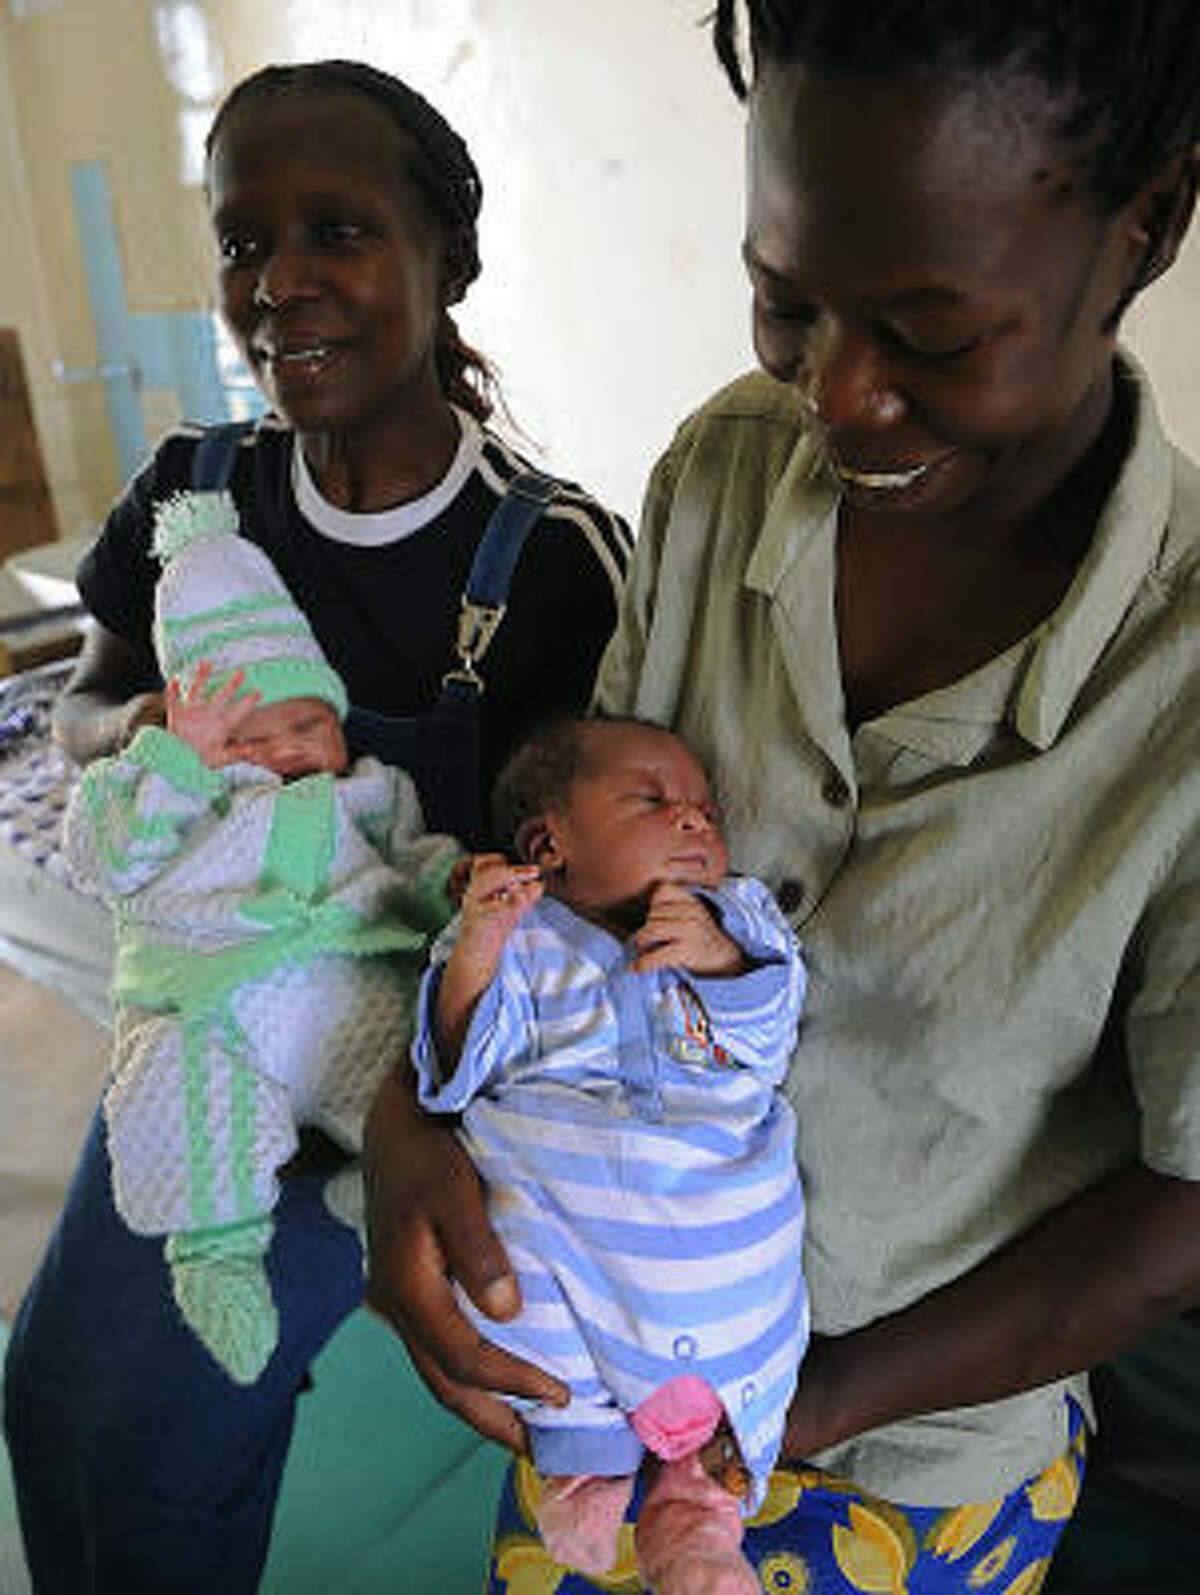 Kenyan mothers Linda Omondi, with baby Michelle Obama, left, and Caroline Akinyi, with baby Barack Obama, carry their newborns named after the new president and first lady on Jan. 21 at the new Nyanza general hospital in Kisumu. They were born moments after the inauguration. Kisumu city is a western lakeside town about an hour drive from the village where Obama's father was born.